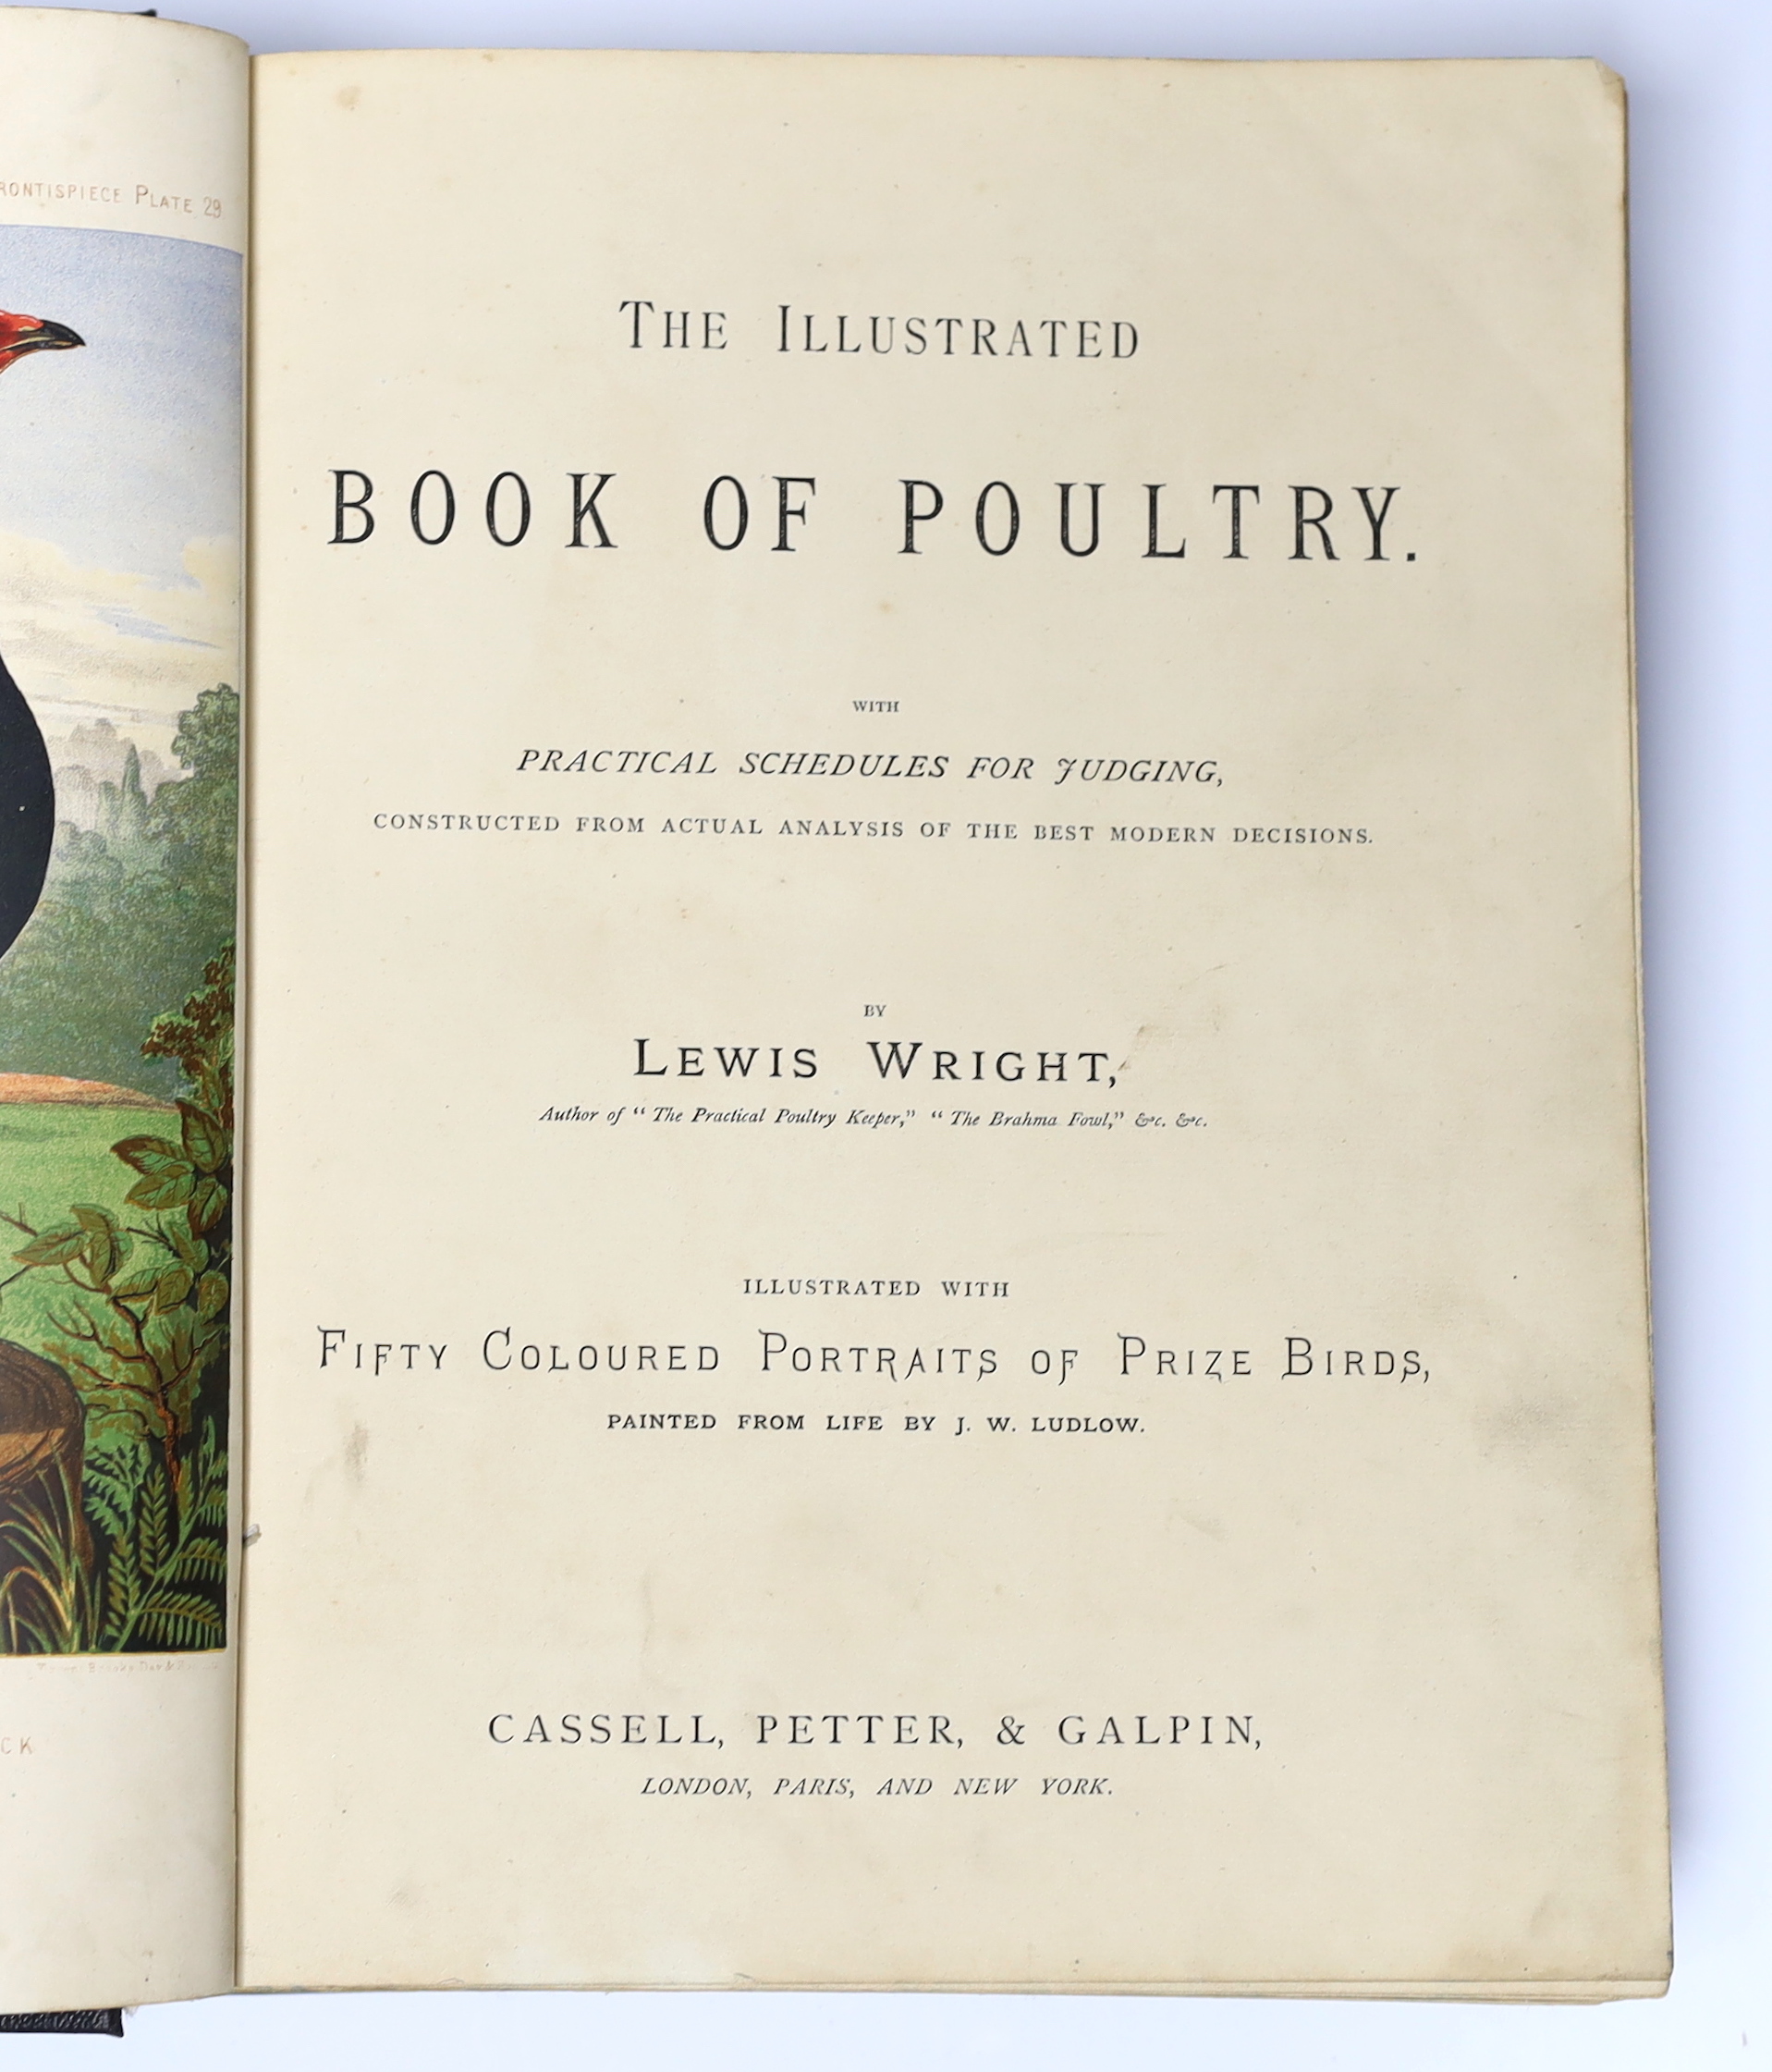 Wright, Lewis - The Illustrated Book of Poultry. 52 coloured plates; rebound cloth with red leather spine label, 4to. (Cassell, 1880?)